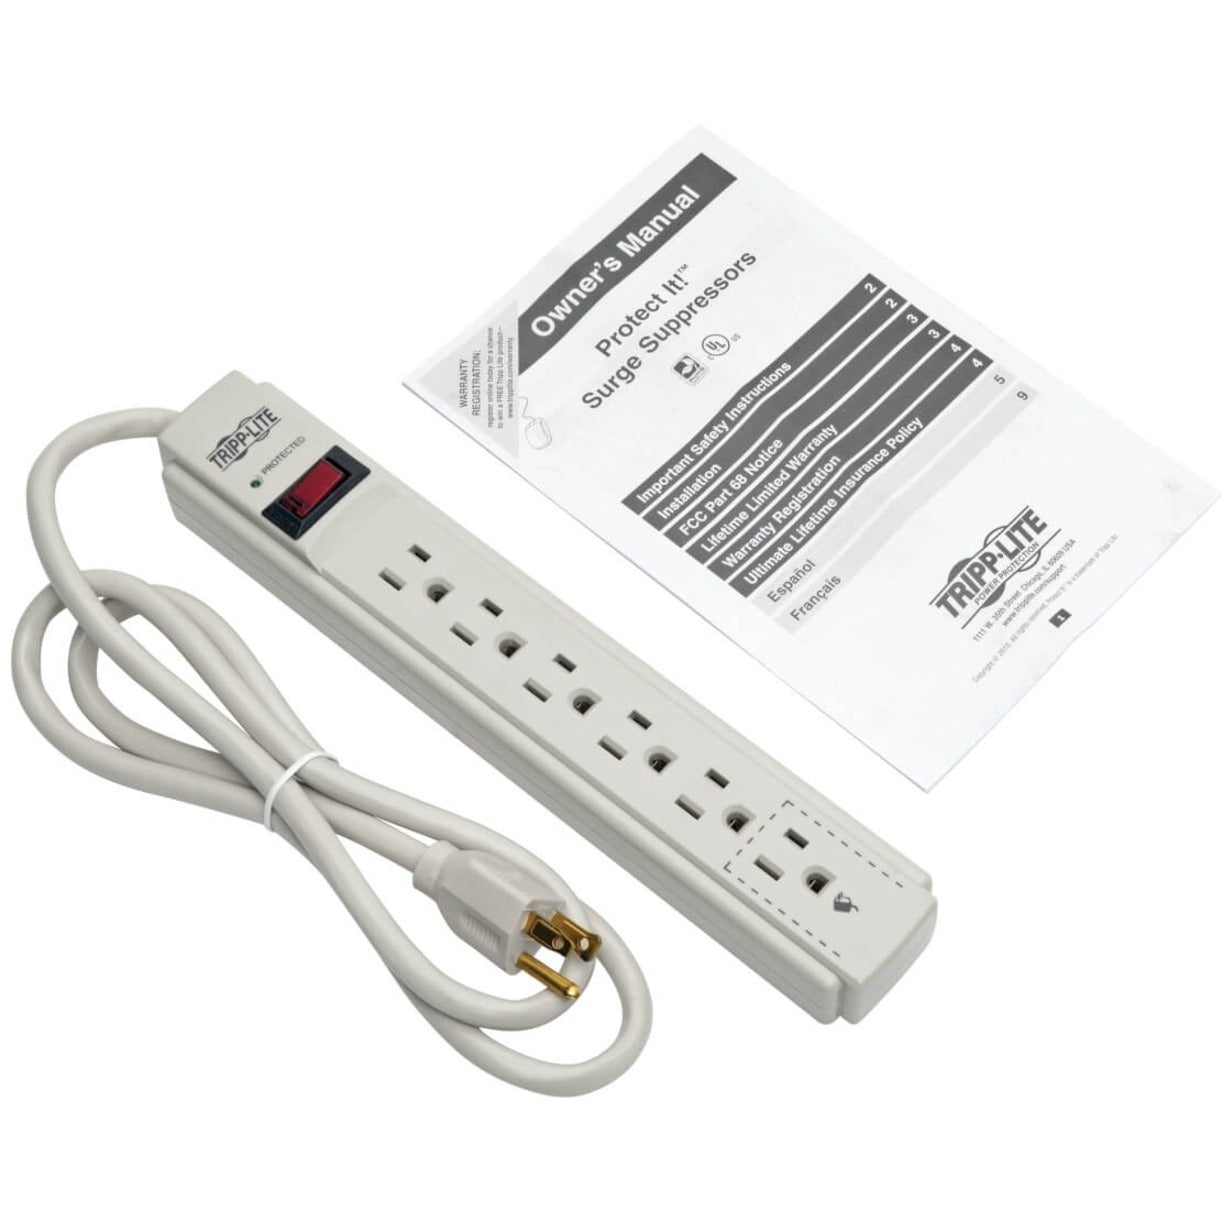 Tripp Lite TLP604 Protect It! 6-Outlet Economy Surge Protector, 790 Joules, 4' Cord